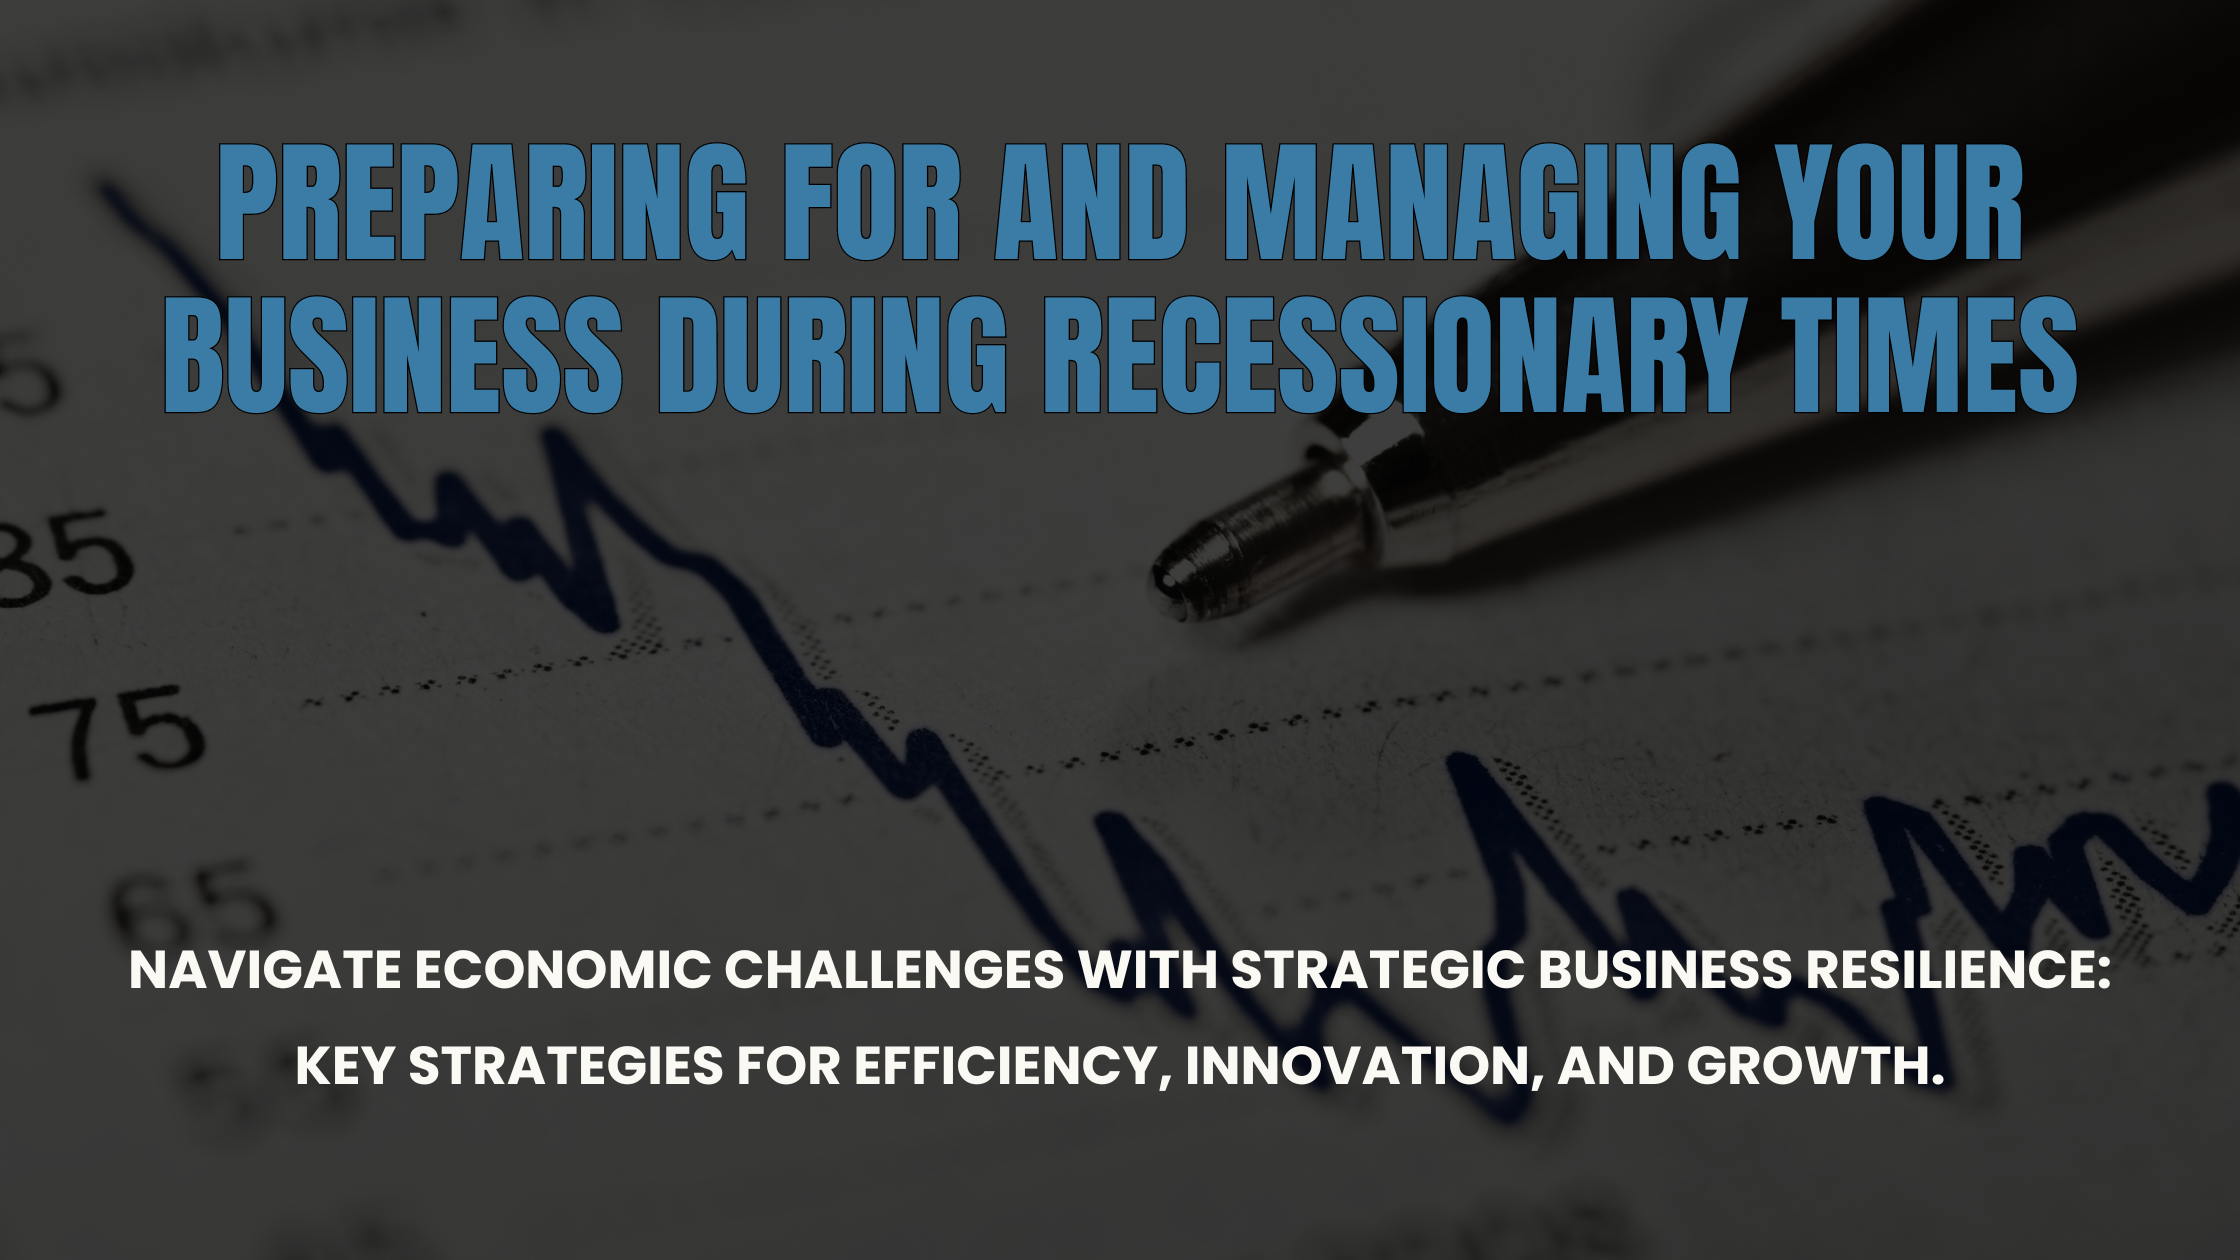 Preparing for and Managing Your Business during Recessionary Times. A blog post to help you Navigate Economic Challenges with Strategic Business Resilience: Key Strategies for Efficiency, Innovation, and Growth.